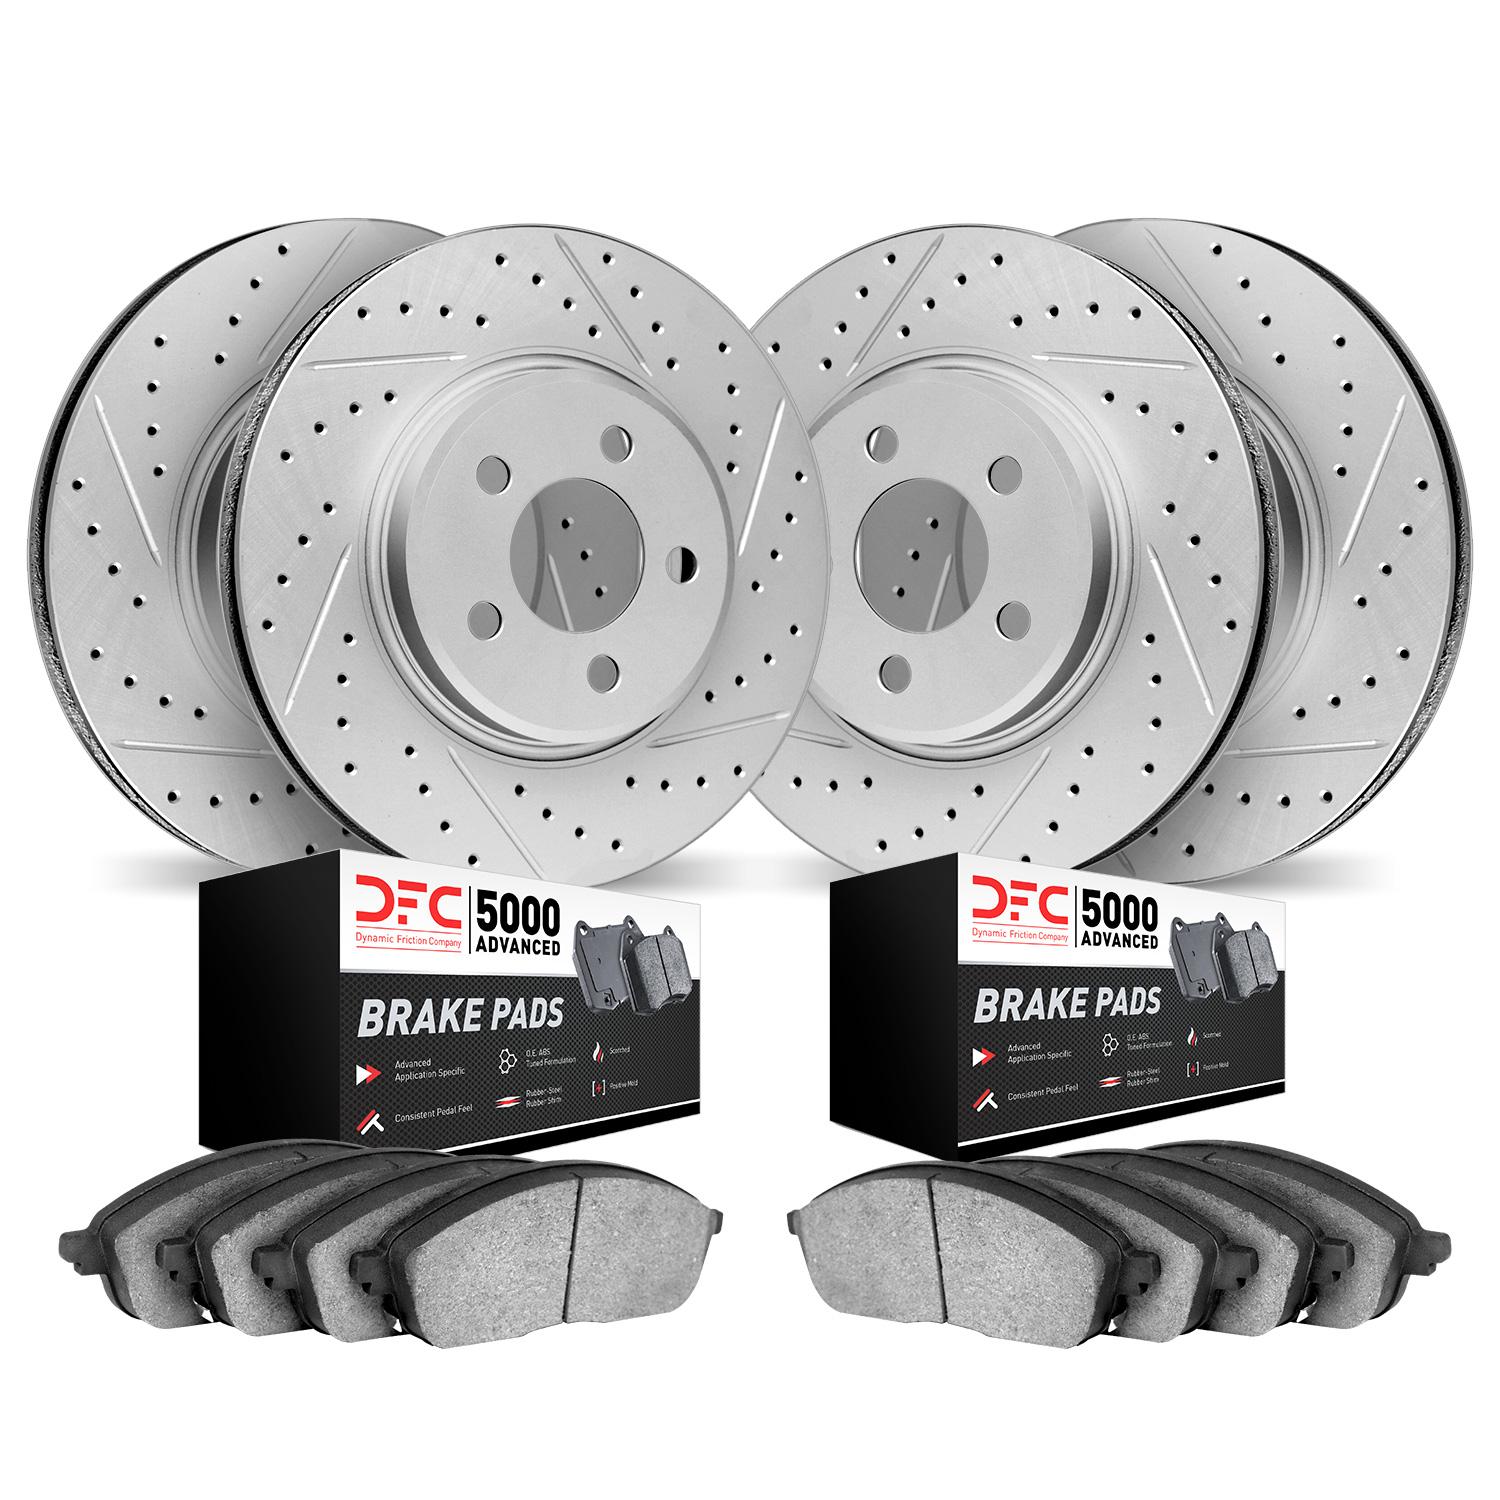 2504-31003 Geoperformance Drilled/Slotted Rotors w/5000 Advanced Brake Pads Kit, 2006-2008 BMW, Position: Front and Rear